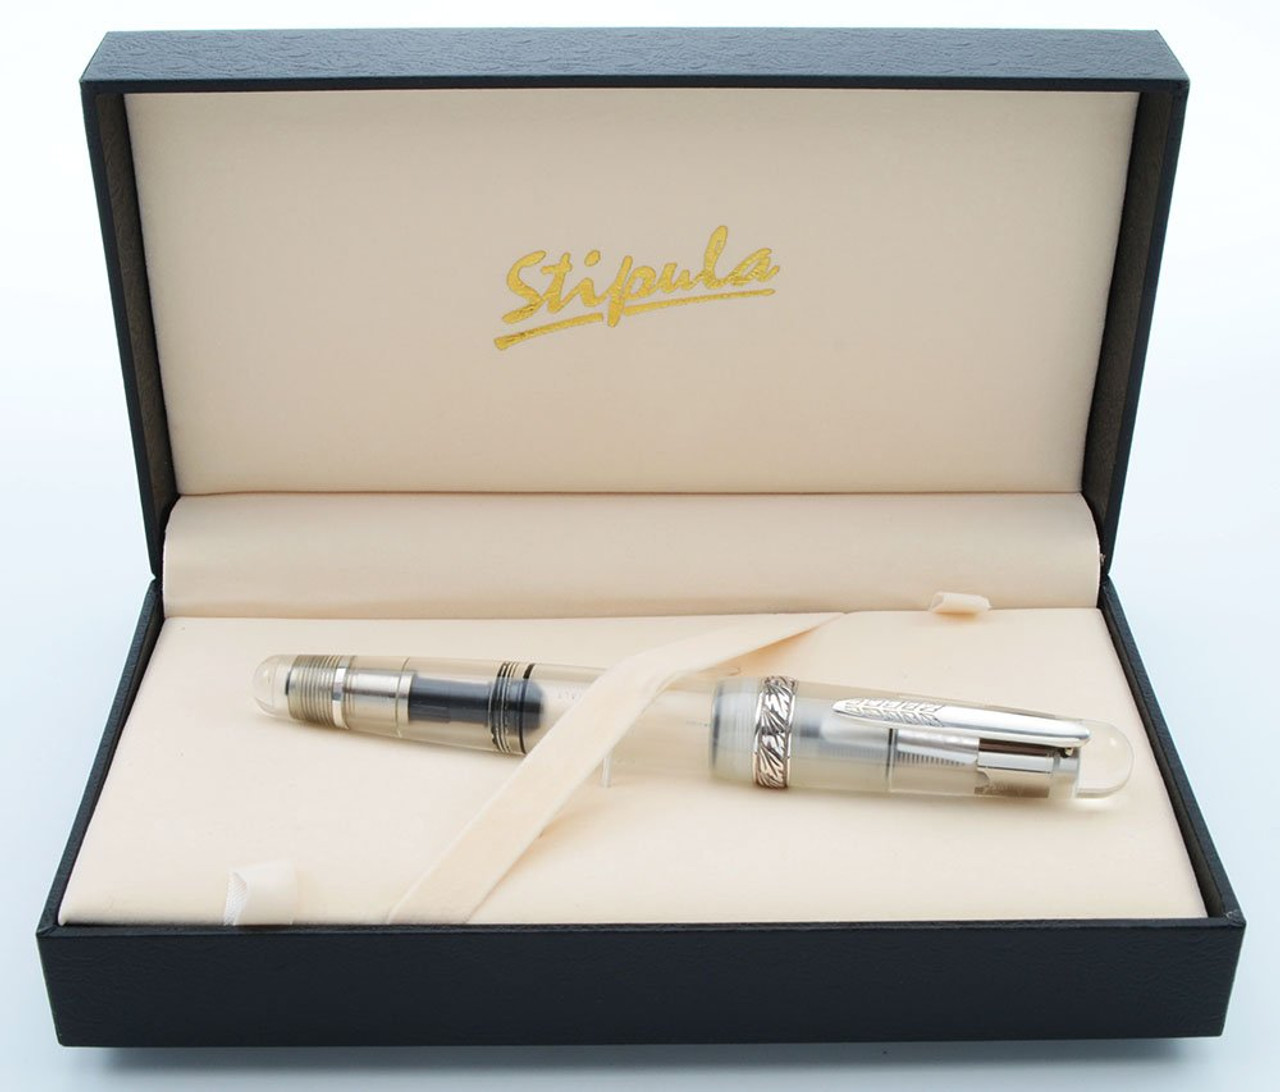 Stipula Etruria Nuda Demonstrator Fountain Pen LE (190/351) - Clear Resin, Sterling Trim, Piston Fill, Broad 14k Nib (Excellent + In Box, Works Well)